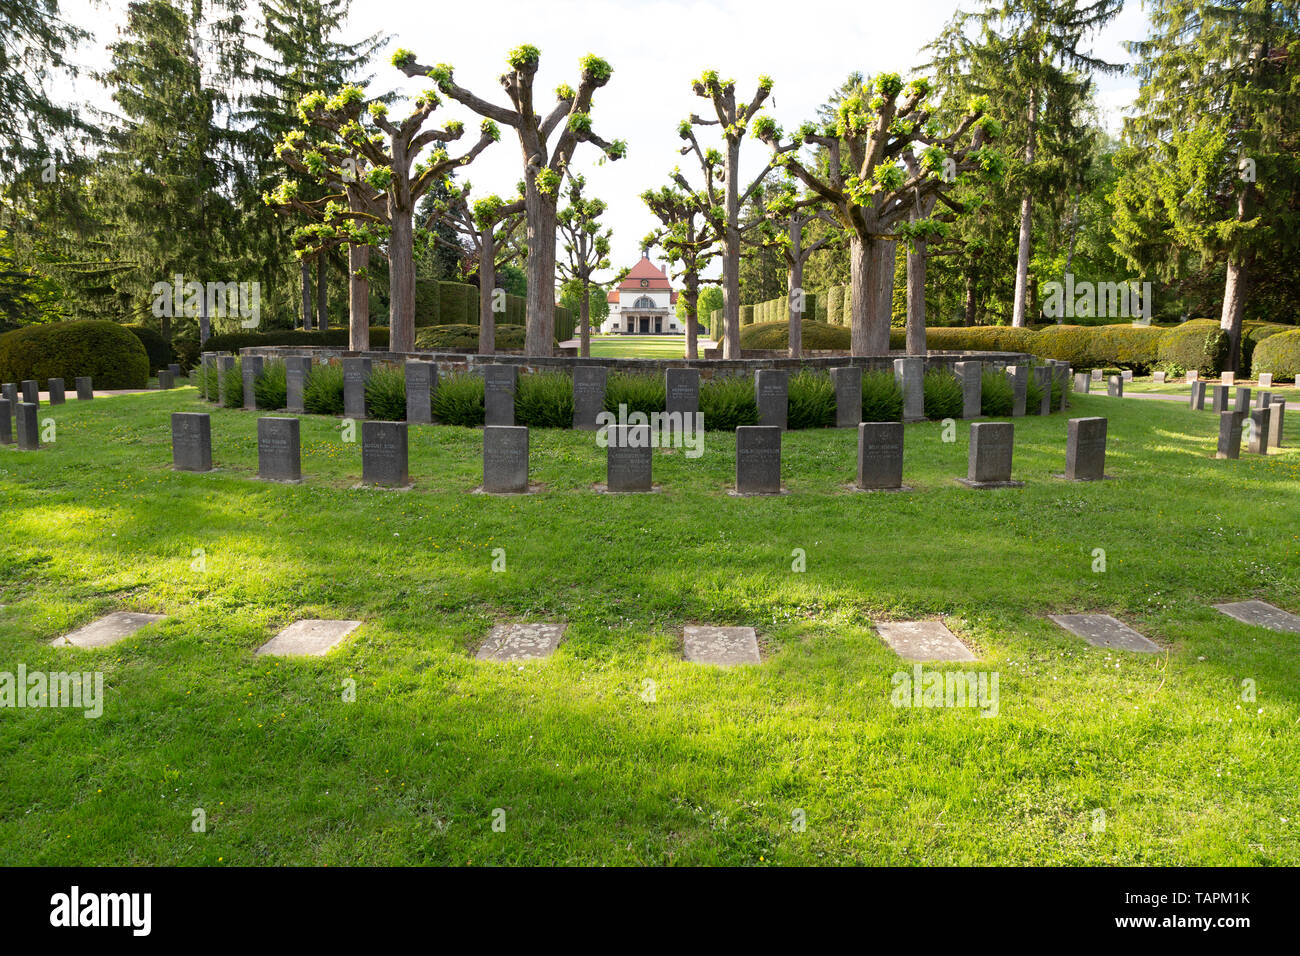 Graves of fallen German Army soldiers of World War One in Wiesbaden, Germany. Stock Photo